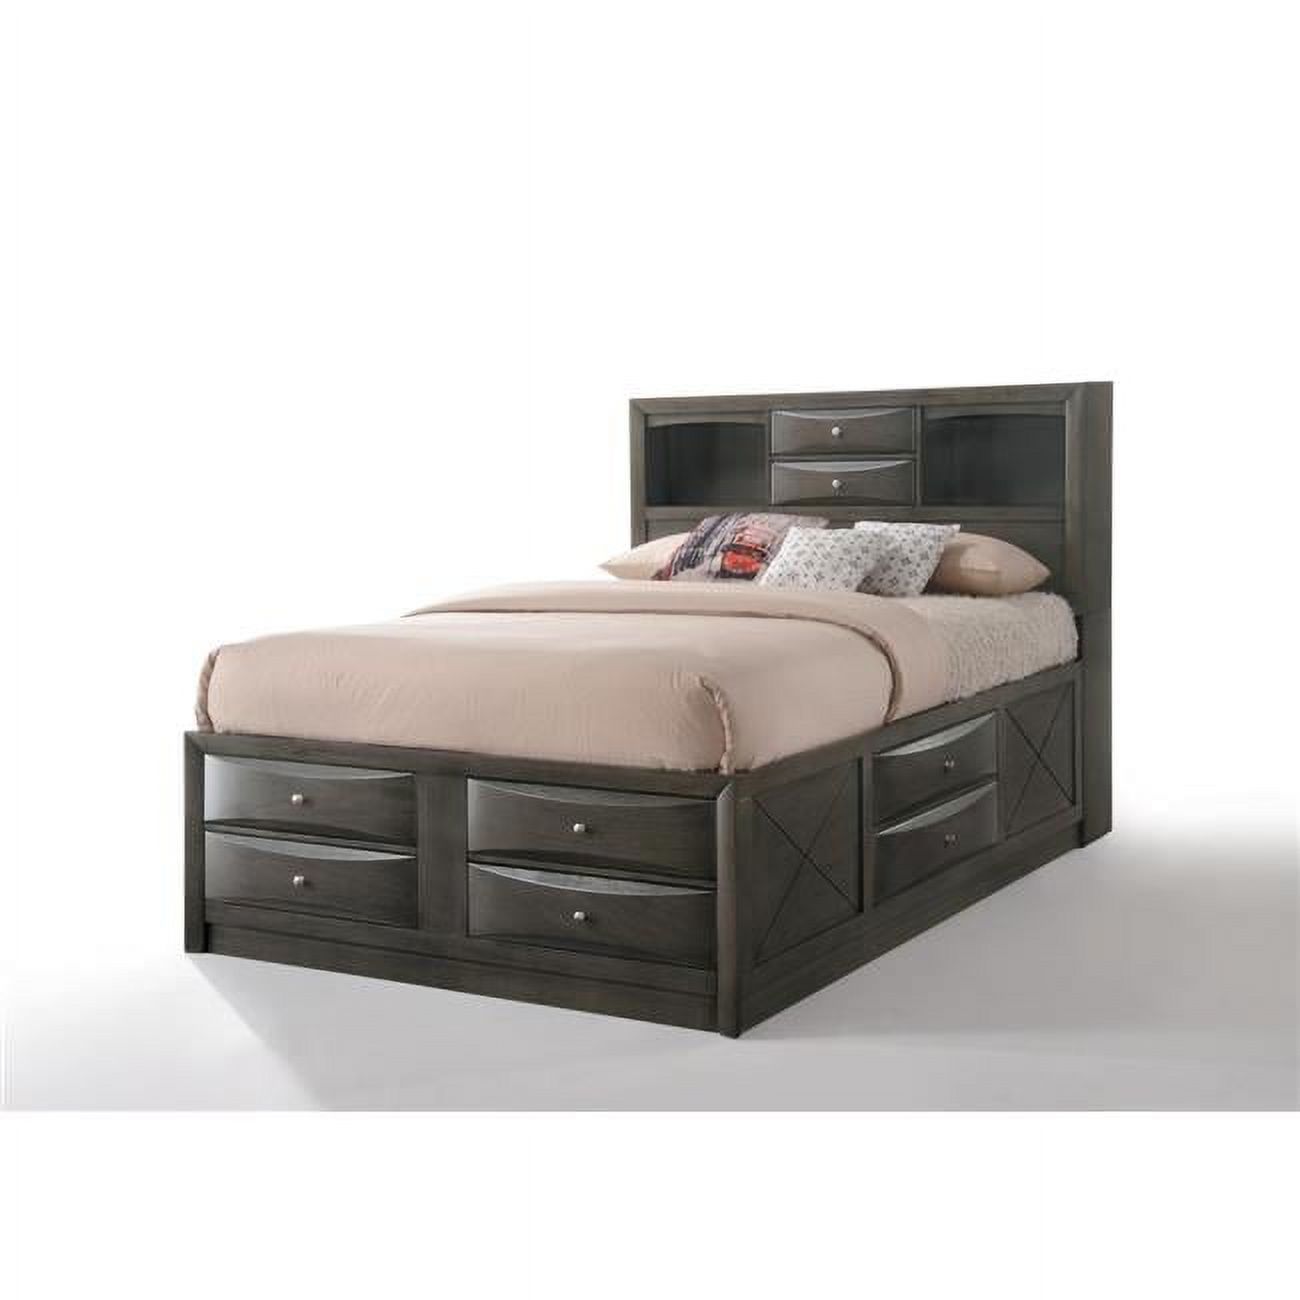 86" X 57" X 56" Gray Oak Rubber Wood Full Storage Bed - image 1 of 6